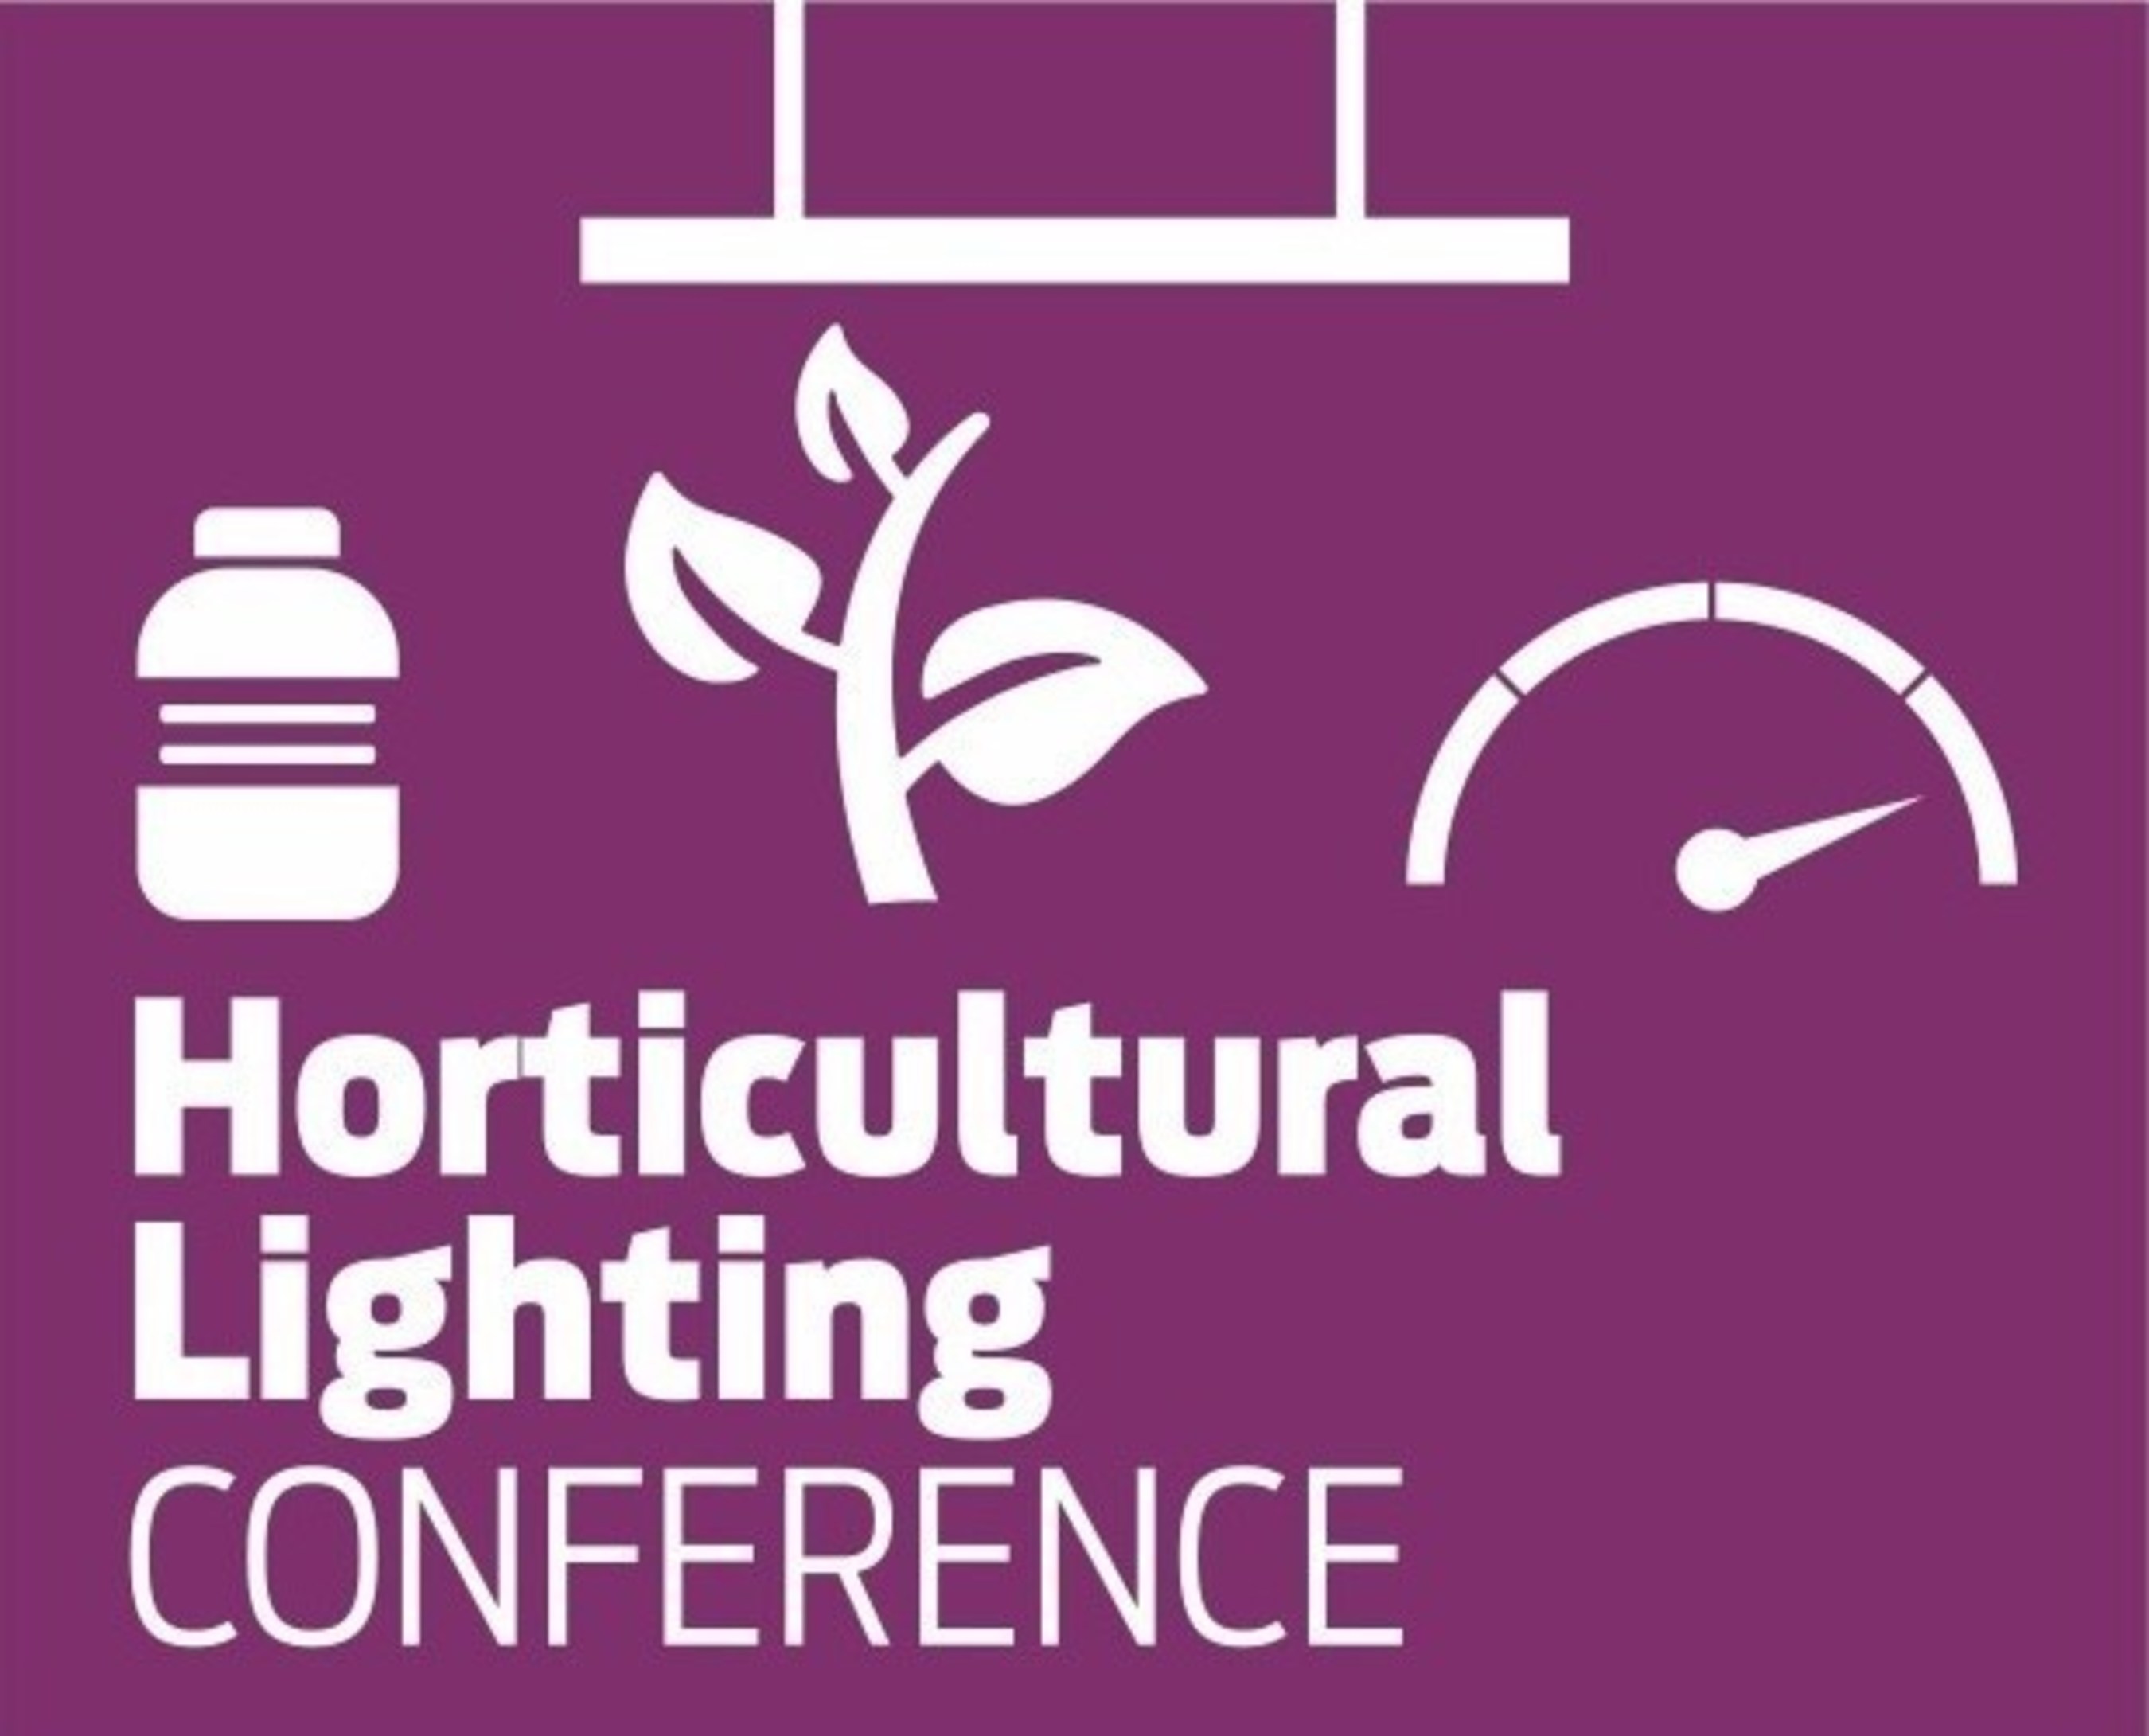 The Horticultural Lighting Conference will be held on October 12, 2016 at the Palmer House Hilton in Chicago, IL. Connecting research and technology to end user applications, this specialized one-day conference will provide cutting-edge information on the latest technologies and techniques impacting the advancement of the horticultural lighting market. For more information, visit http://horticulturelightingconference.com.